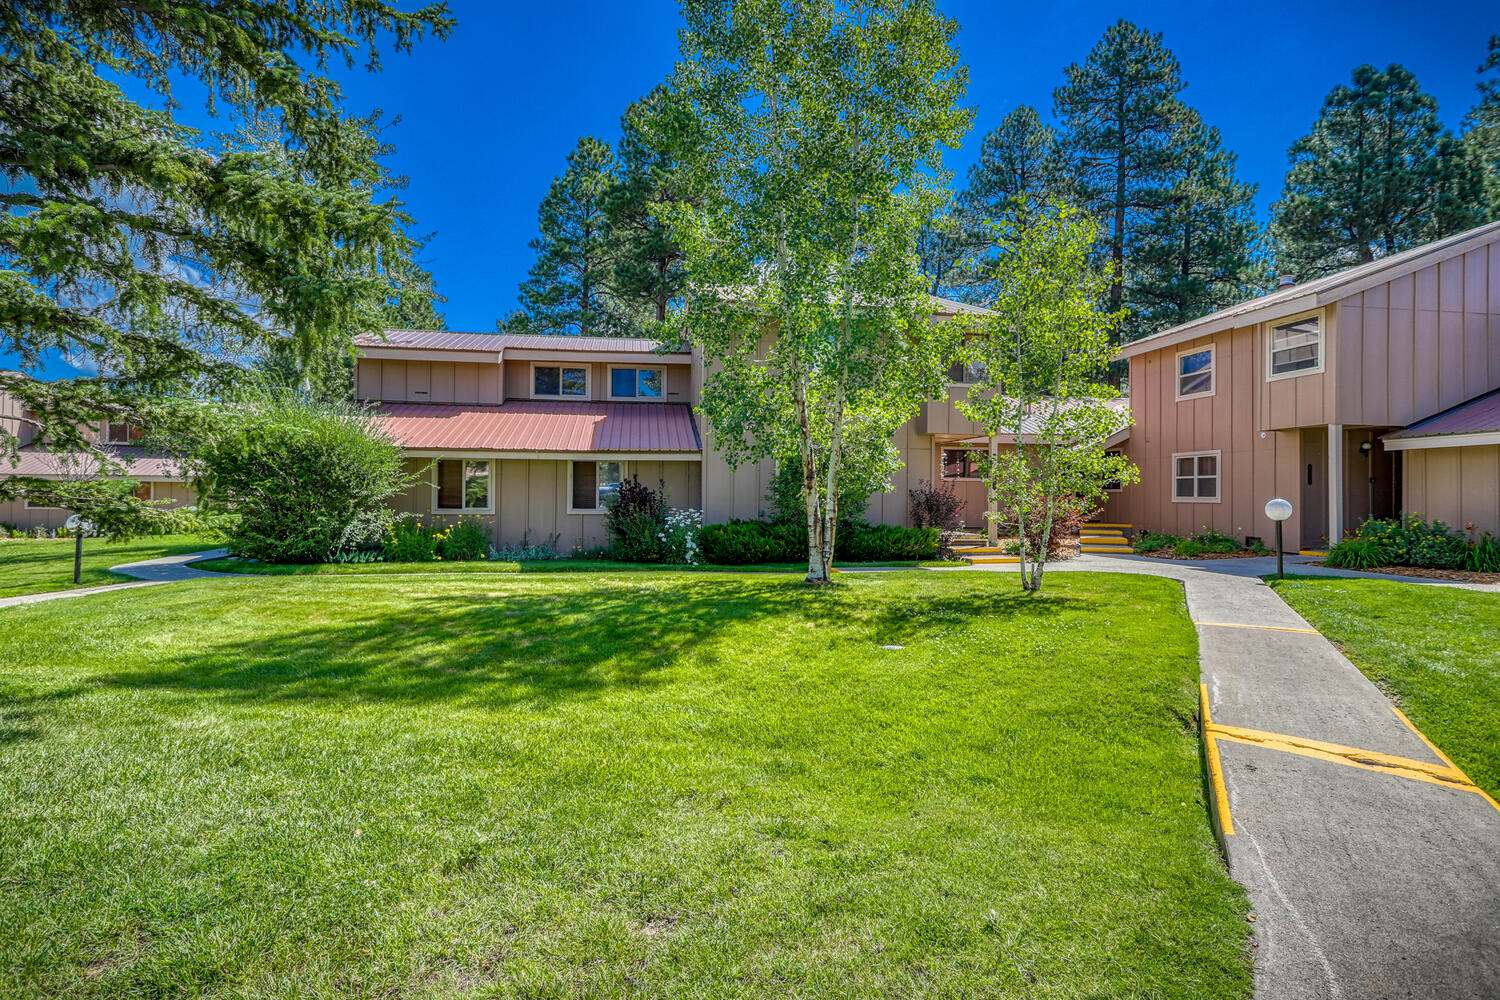 Peace in Pagosa, #145 Davis Cup 4041 - ST, Pagosa Springs, CO 81147